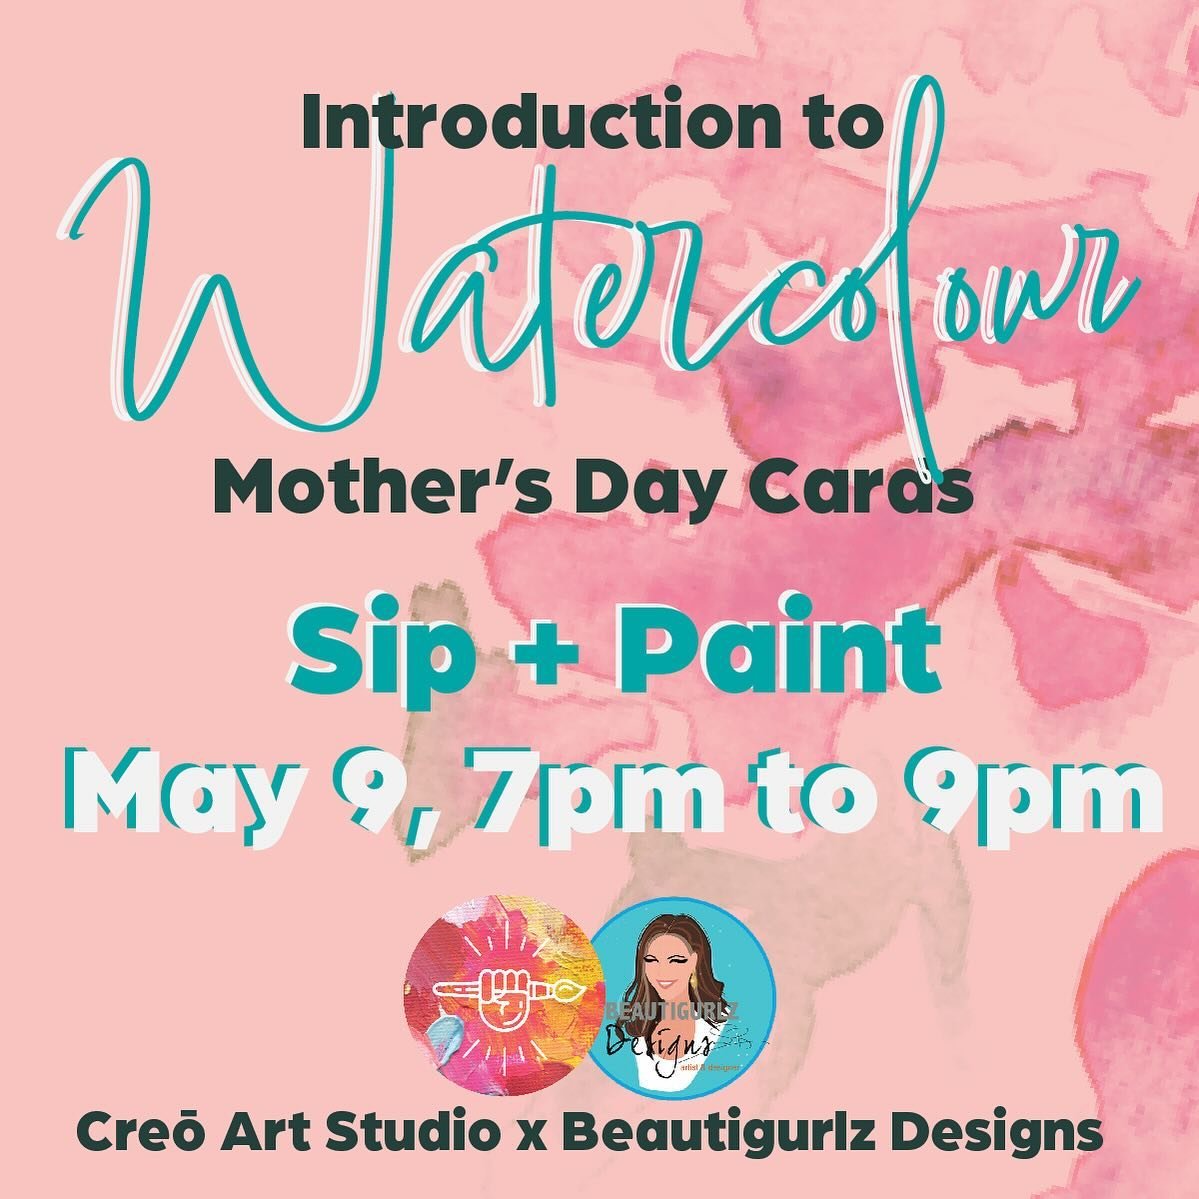 LAST CALL to Register for our Mother&rsquo;s Day Watercolour Workshop happening this Thursday May 9th from 7pm-9pm

Taught by the very talented local artist, Scarlett Ballantyne @beautigurlzdesigns 

This class is for beginner and intermediate painte